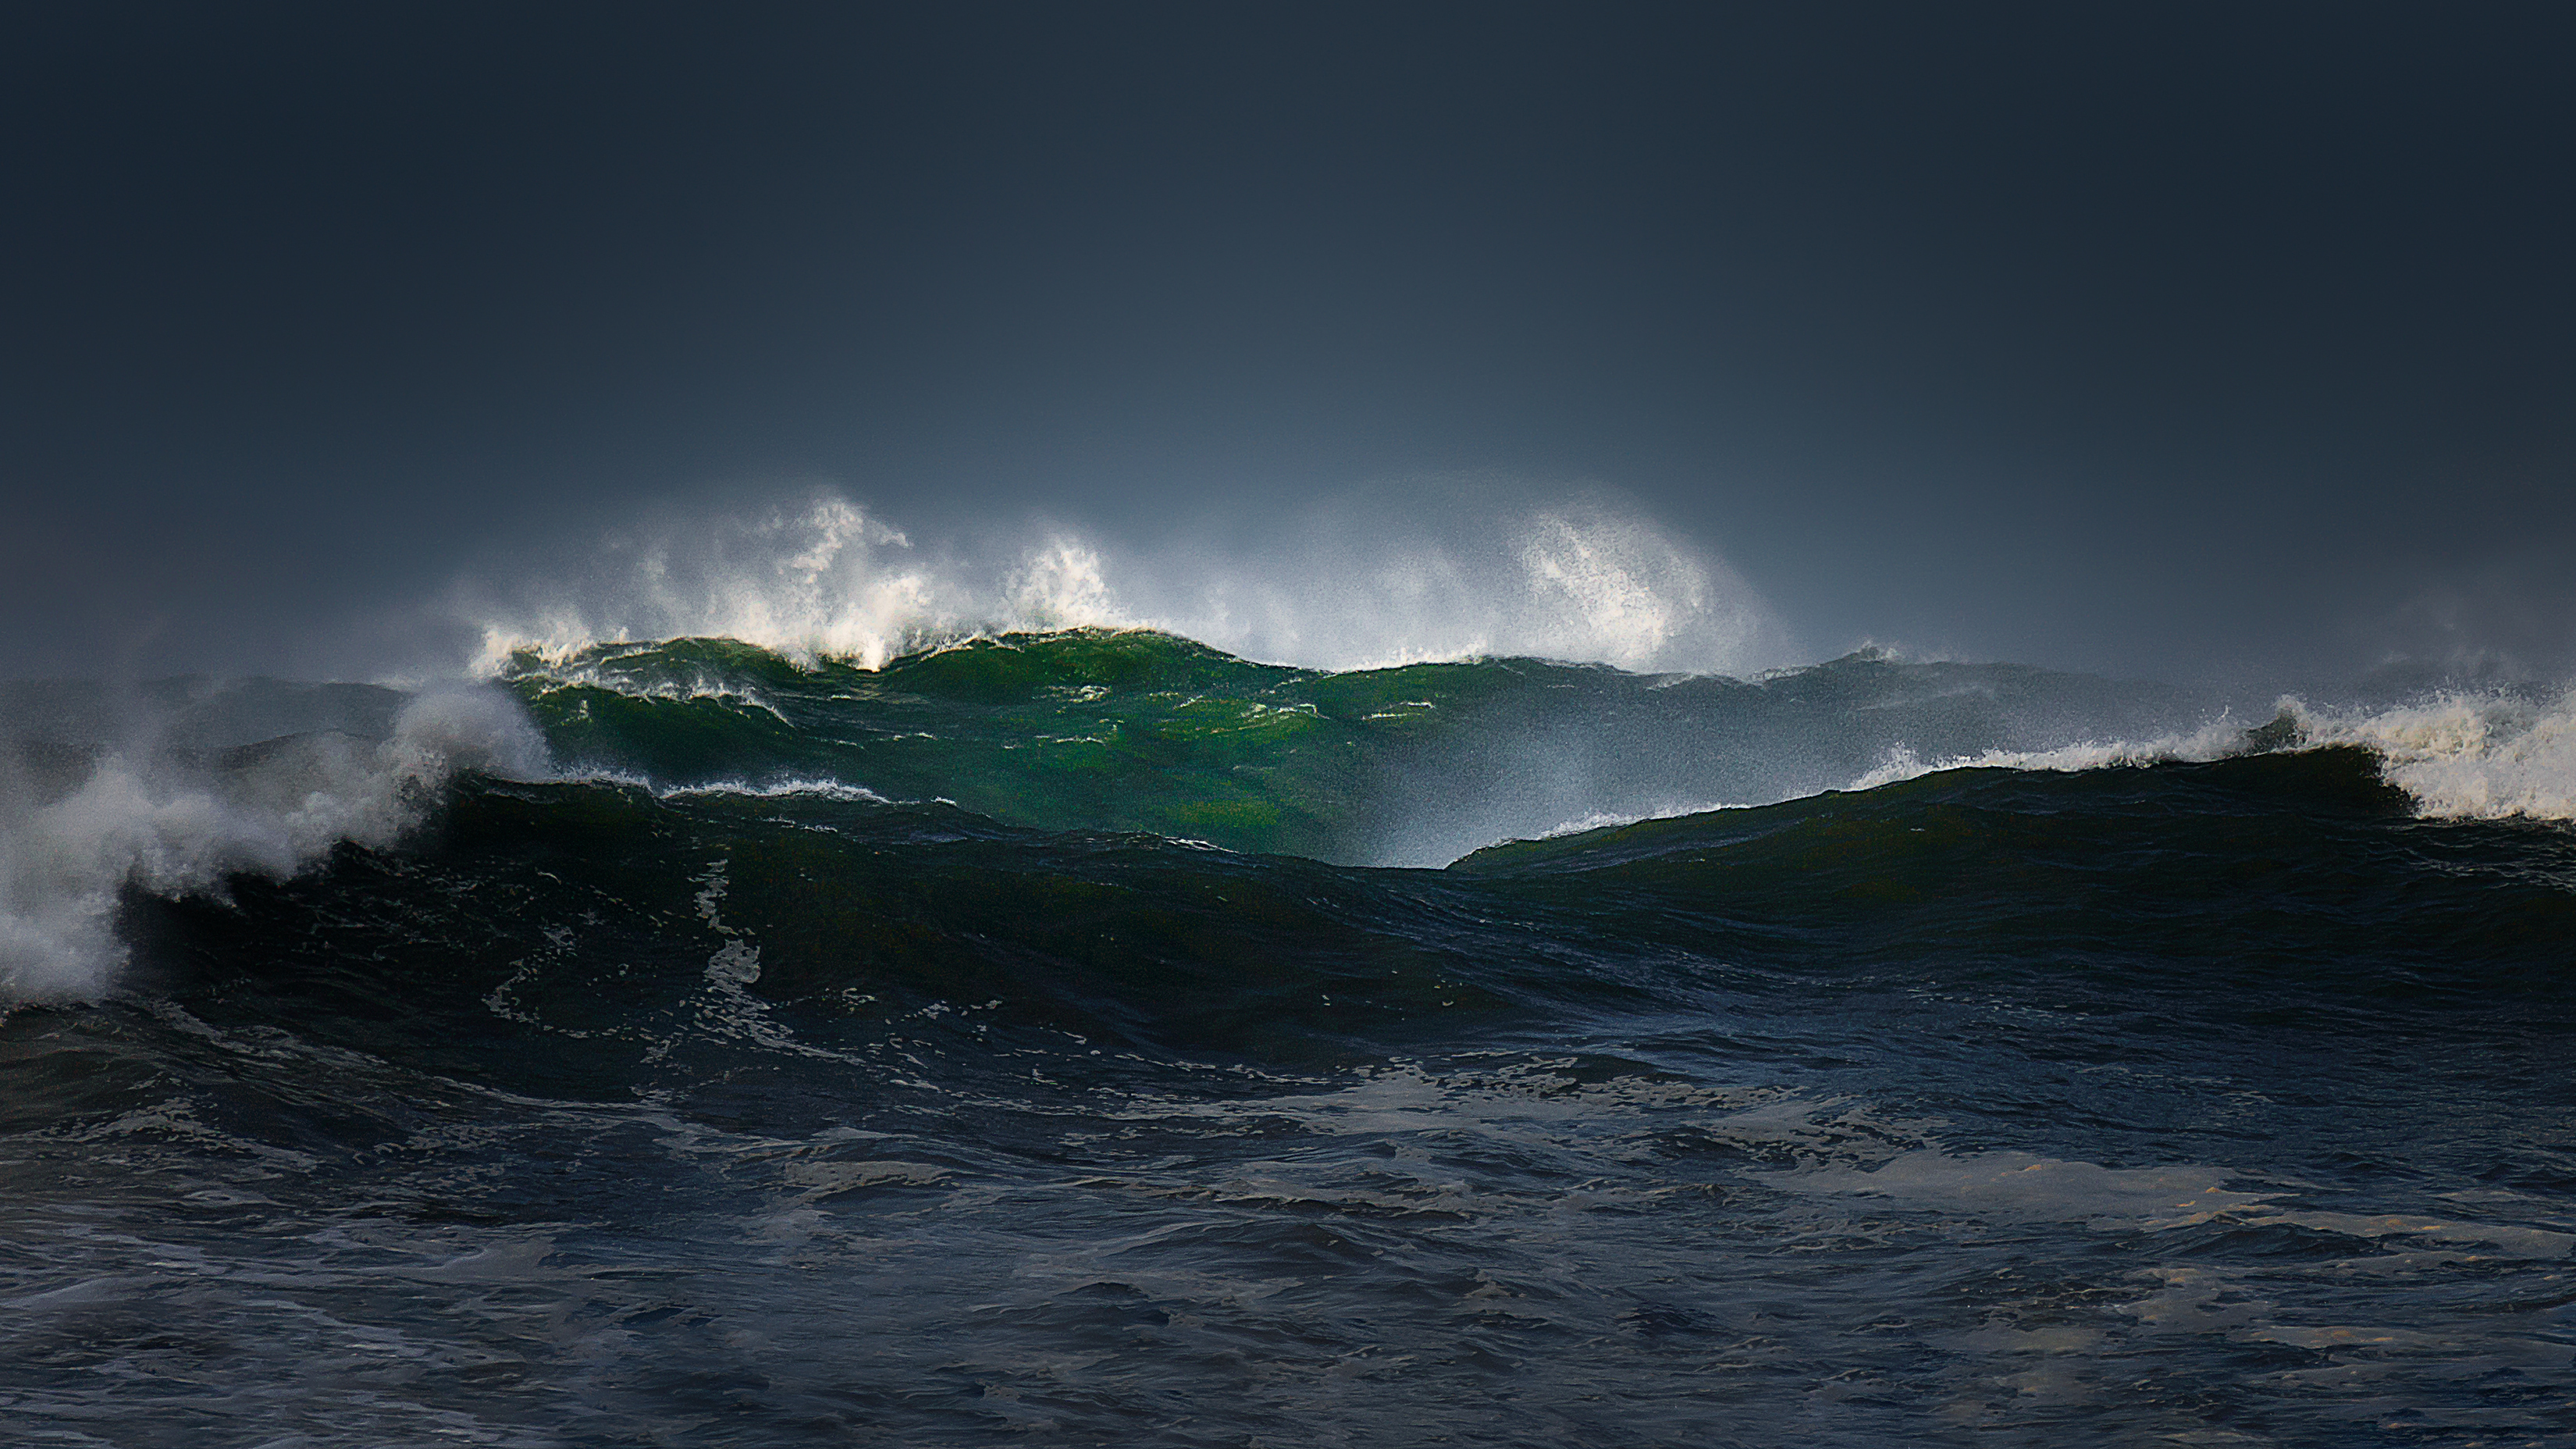 big waves with a stormy weather. | Source: Shutterstock